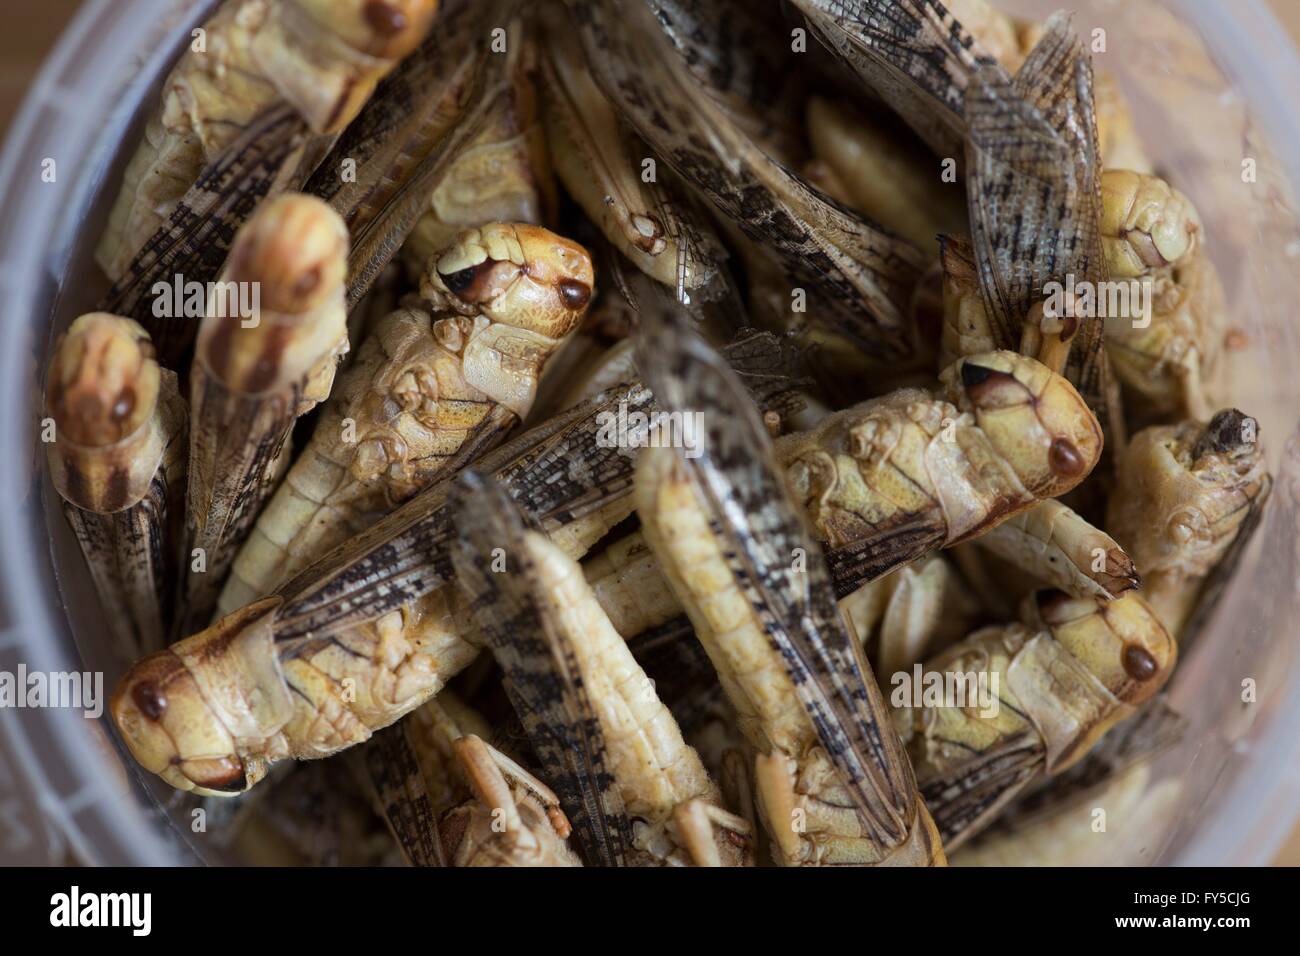 large scale production of edible insects (Grasshopper -Locusta migratoria) in Holland Stock Photo